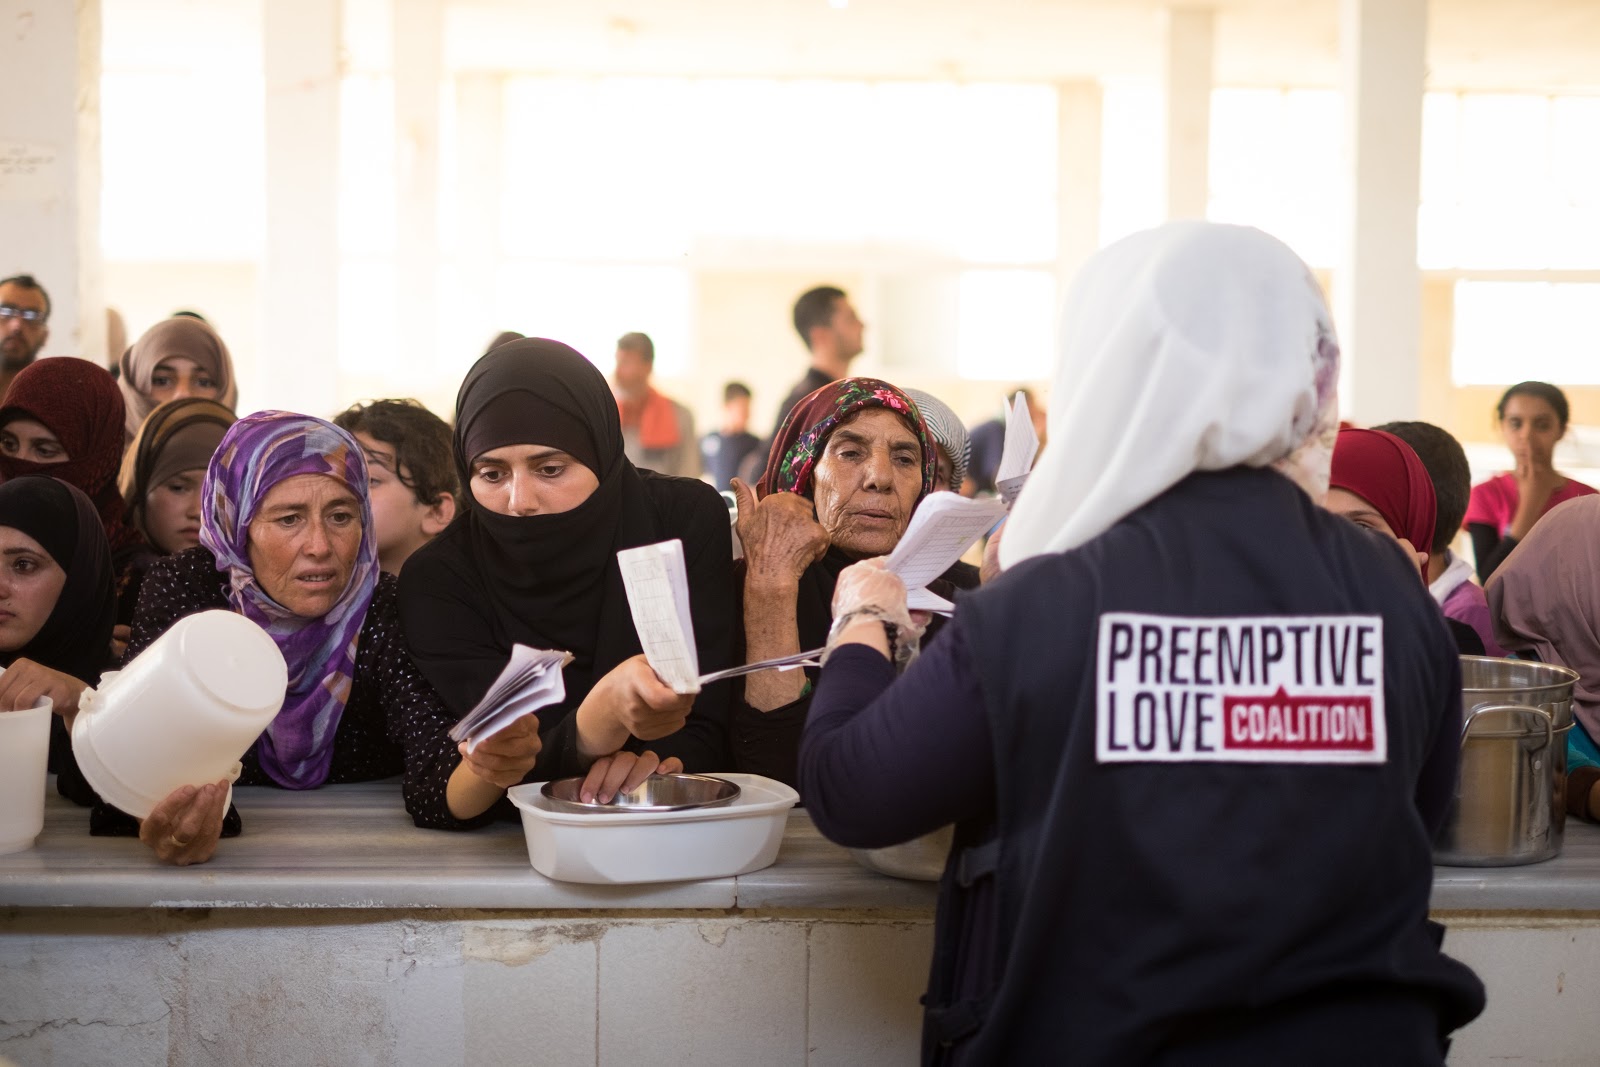 Feeding displaced families in Syria